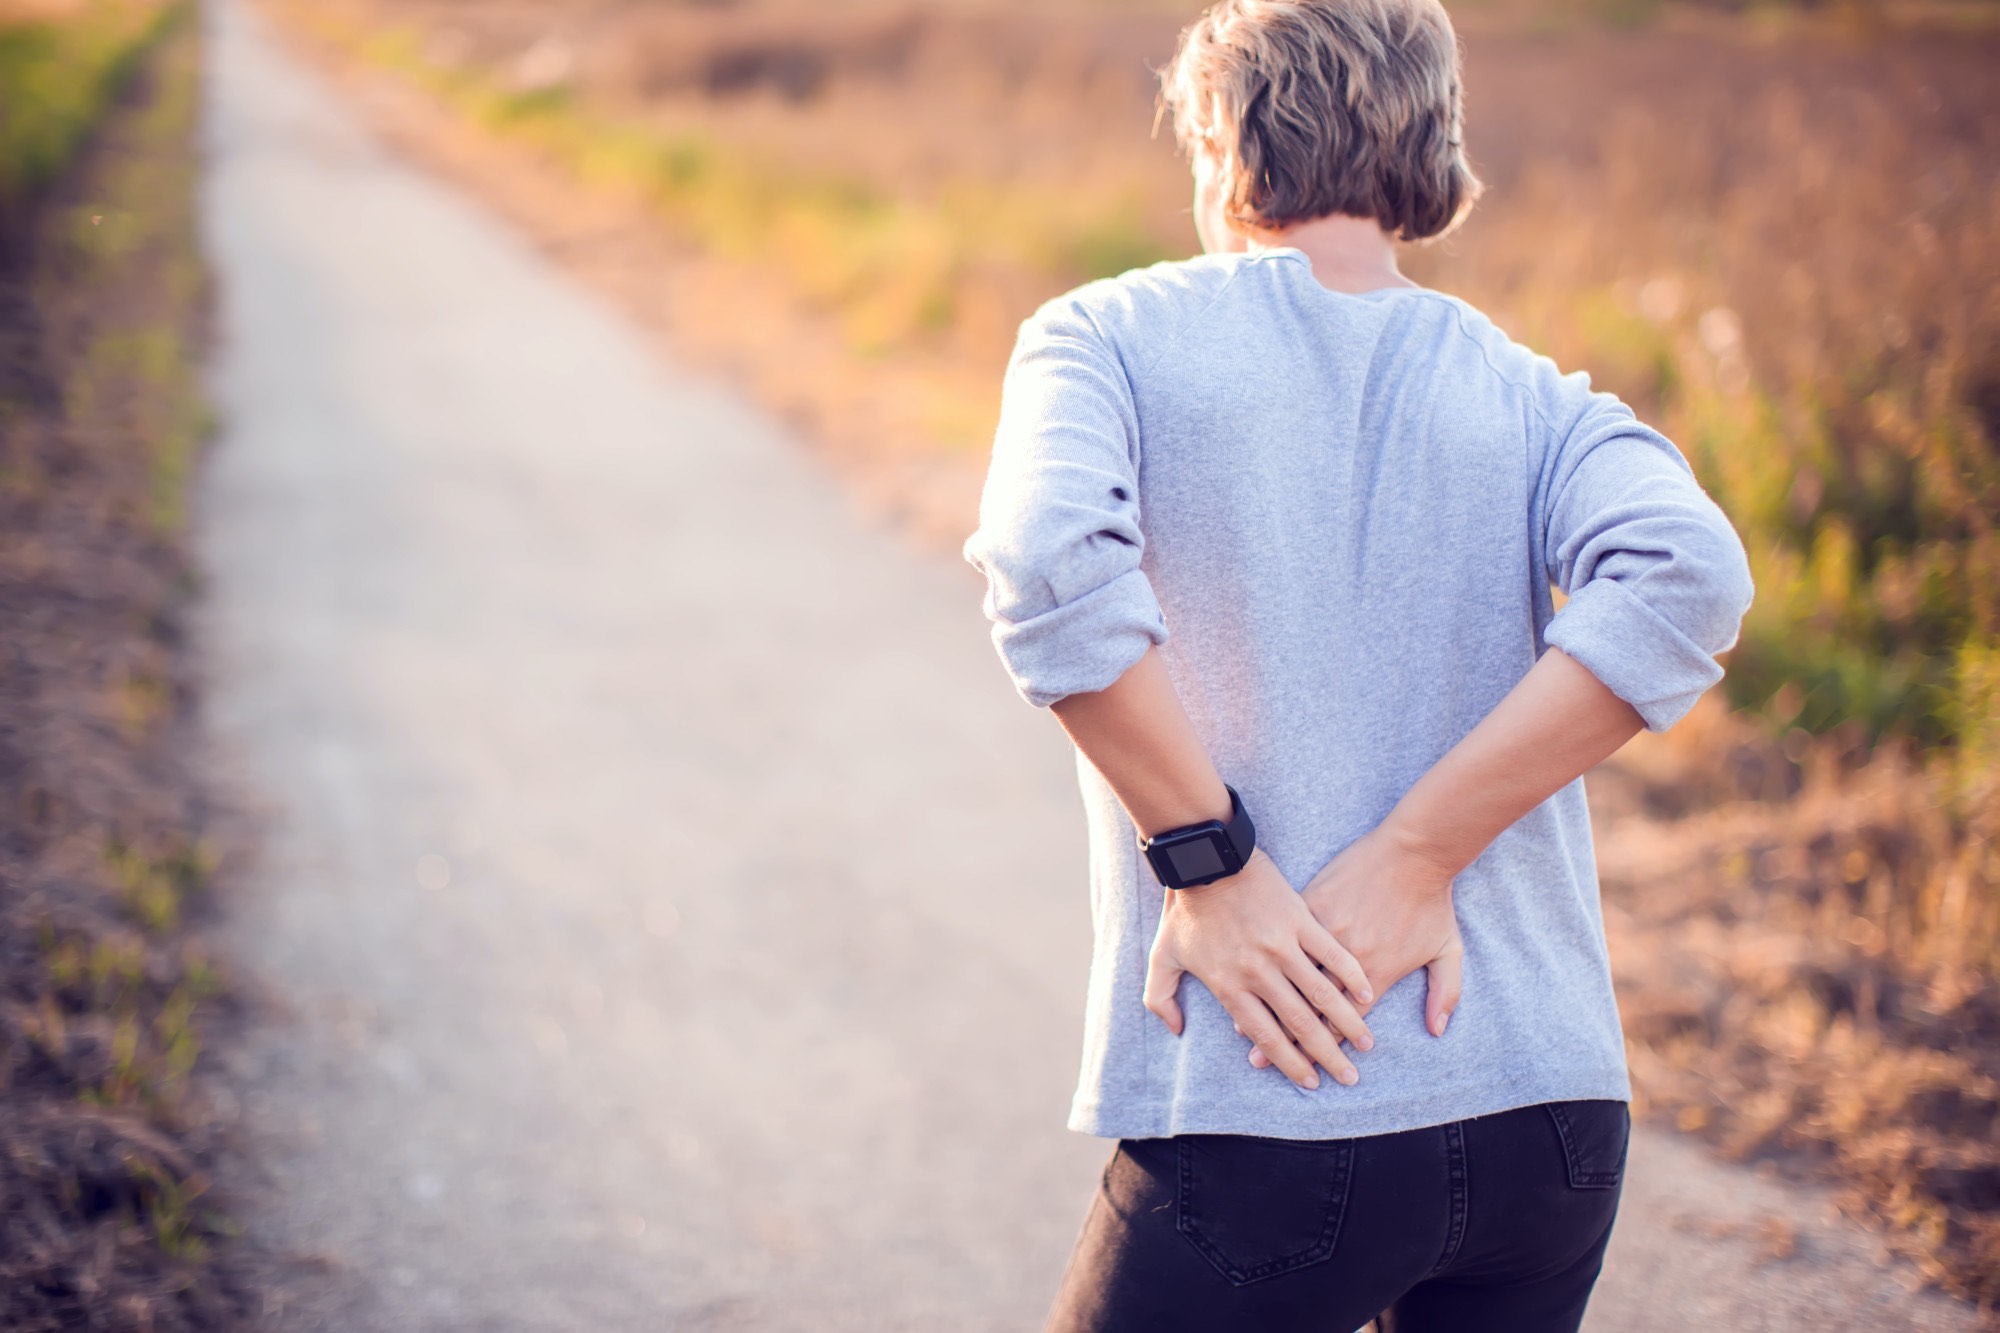 How to Deal With Constant Pain - 10 Top Tips for Managing Pain